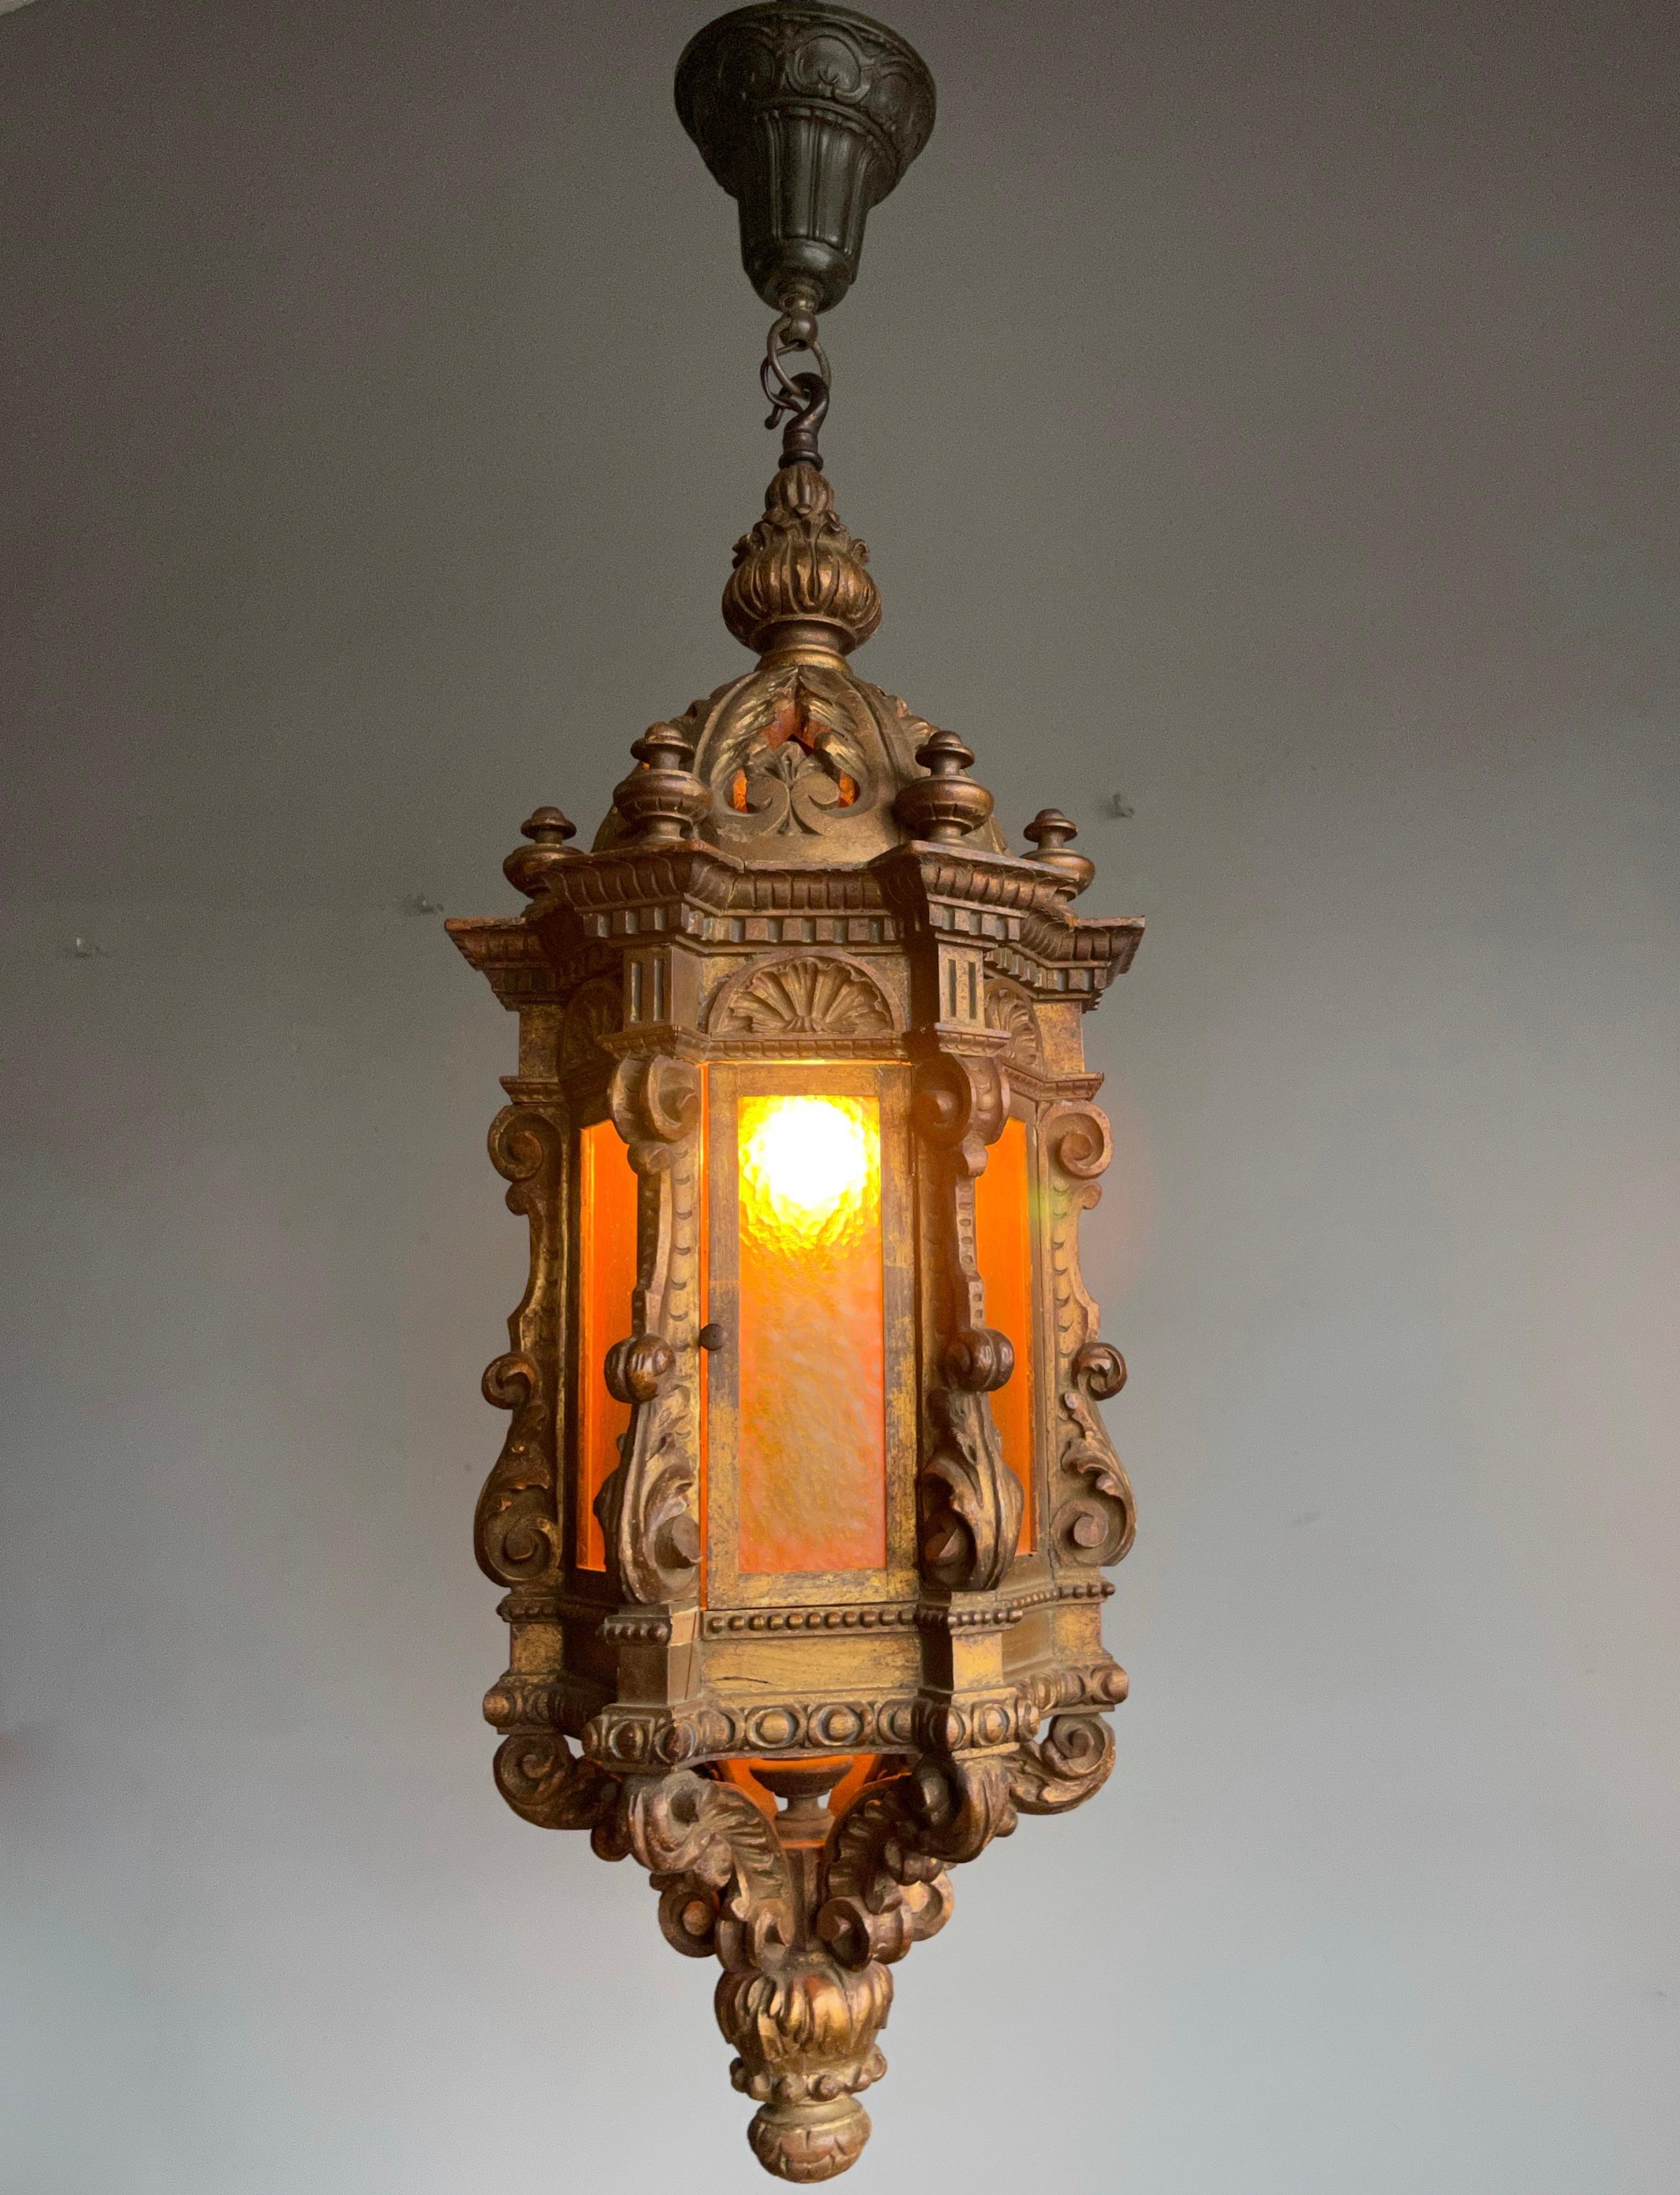 Renaissance Revival Large Antique Italian Carved Gilt Wood Hall Lantern / Pendant w. Cathedral Glass